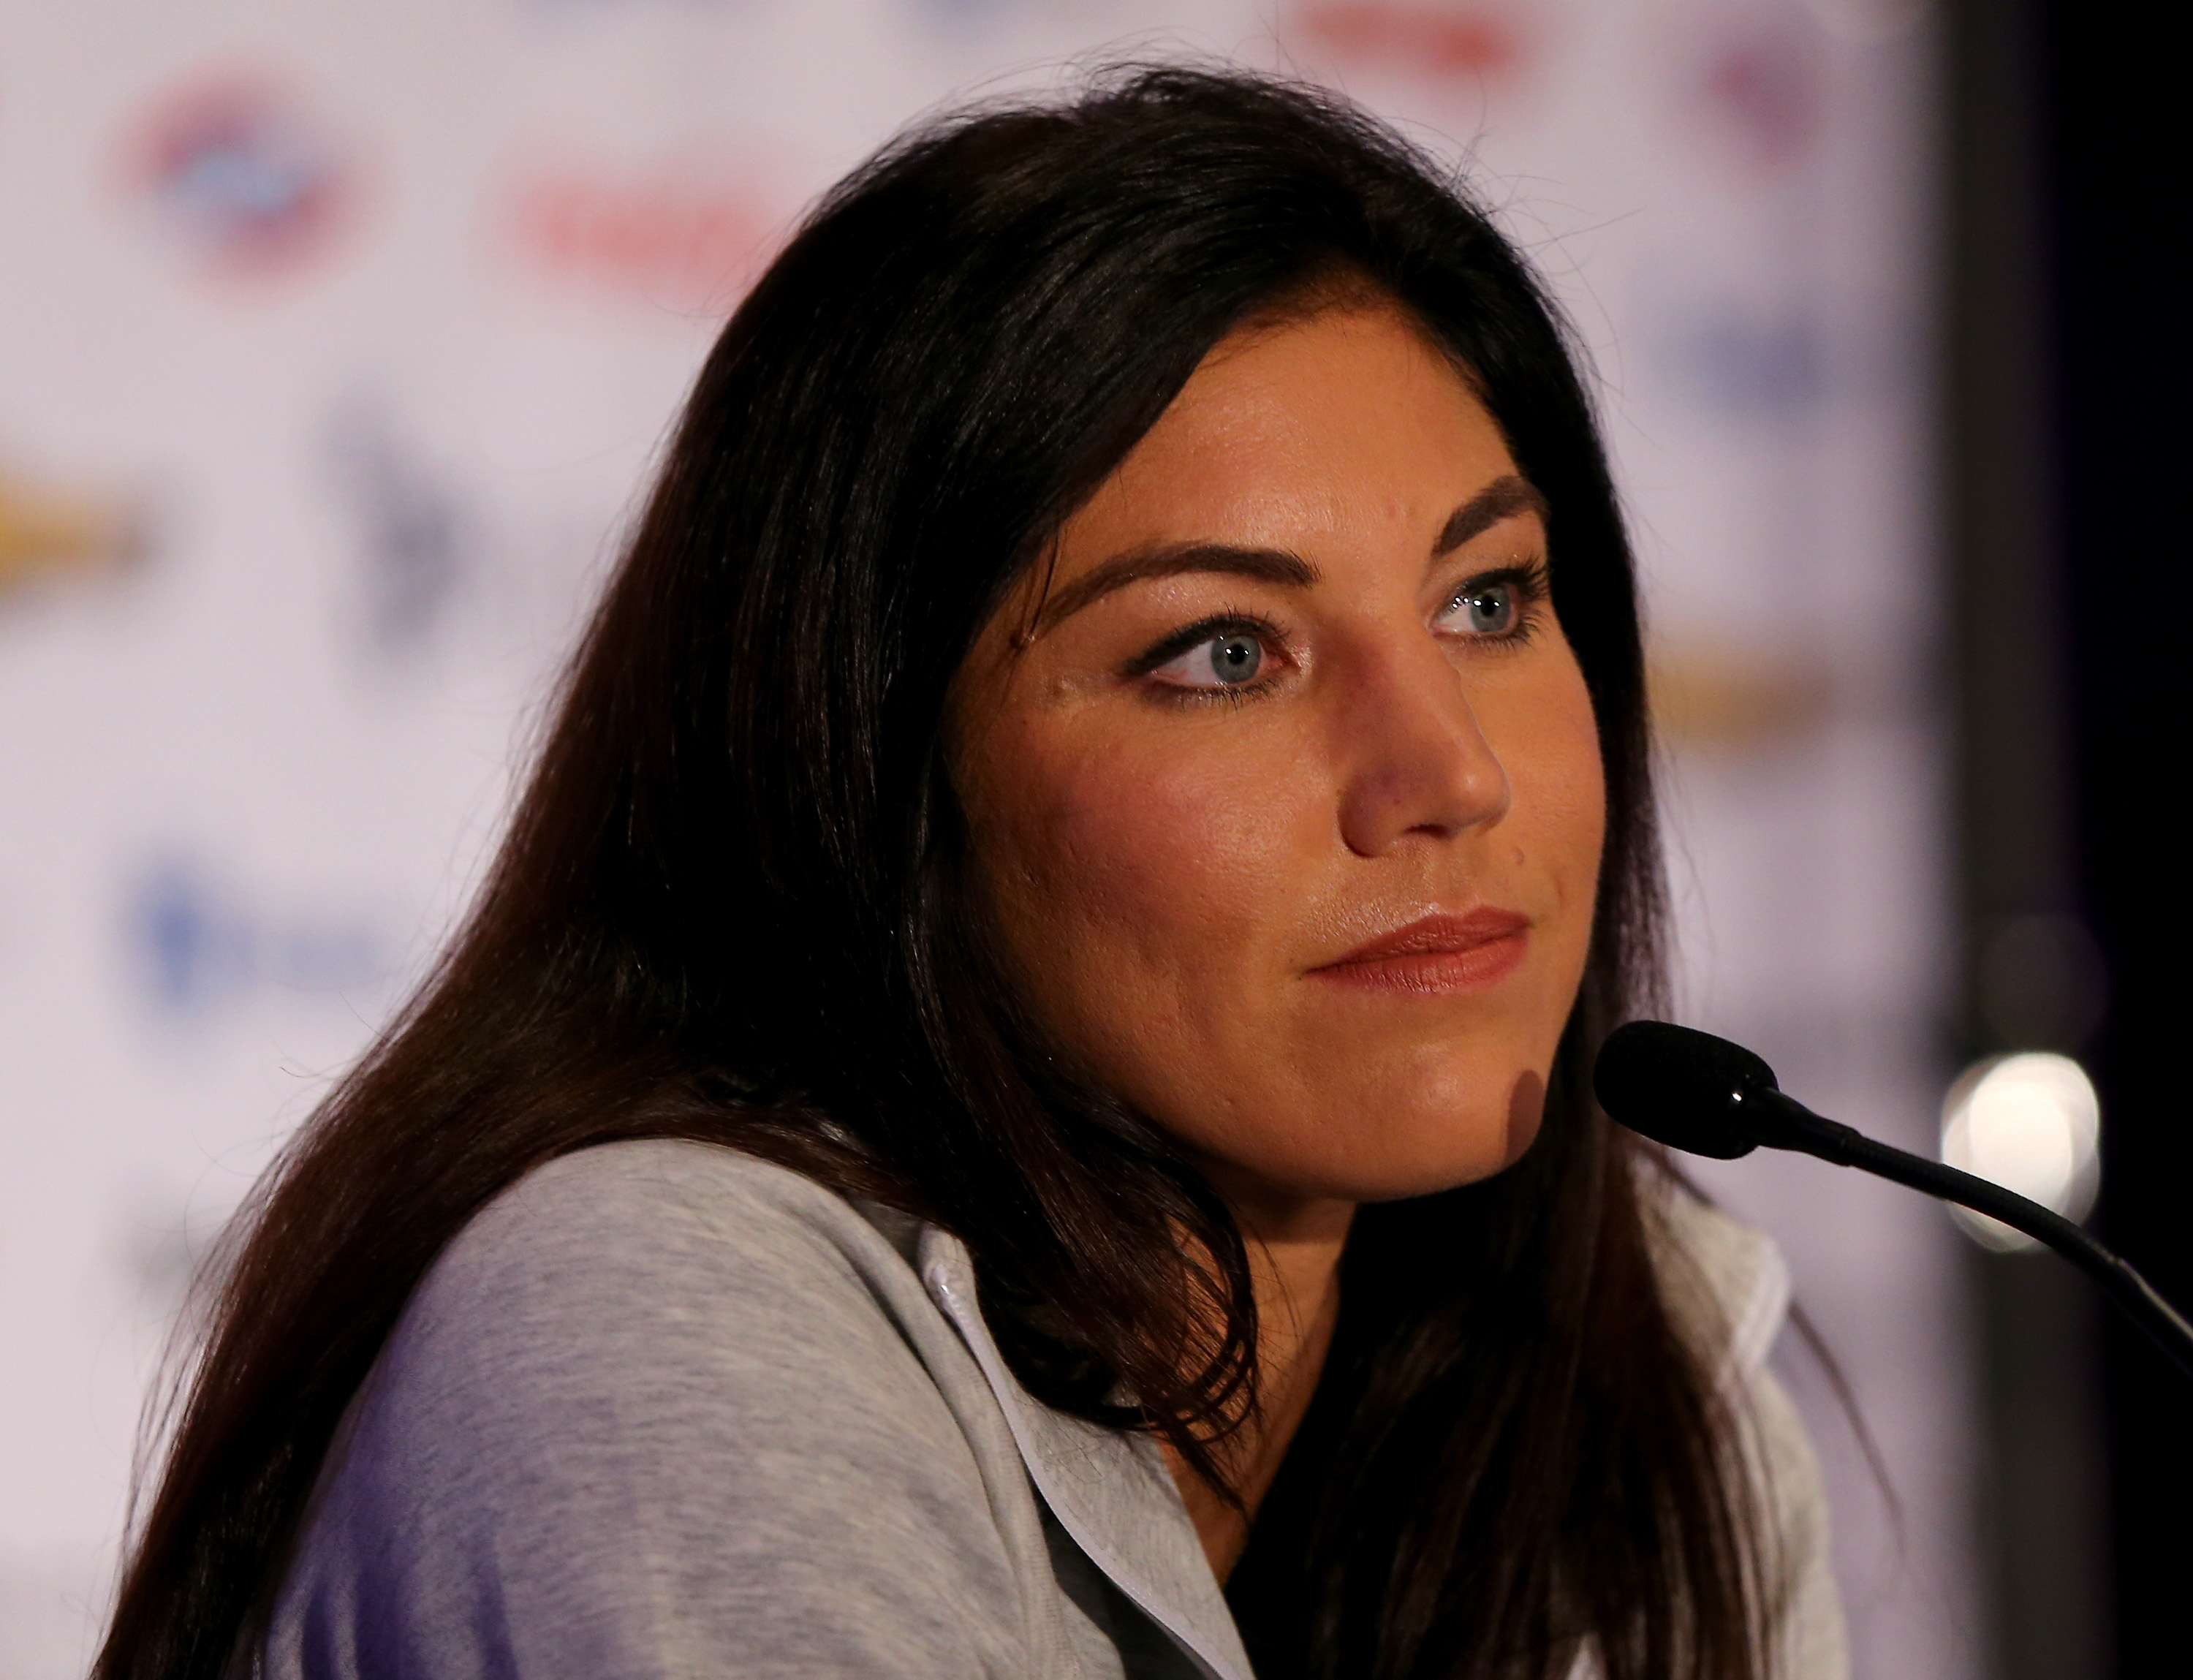 solo by hope solo